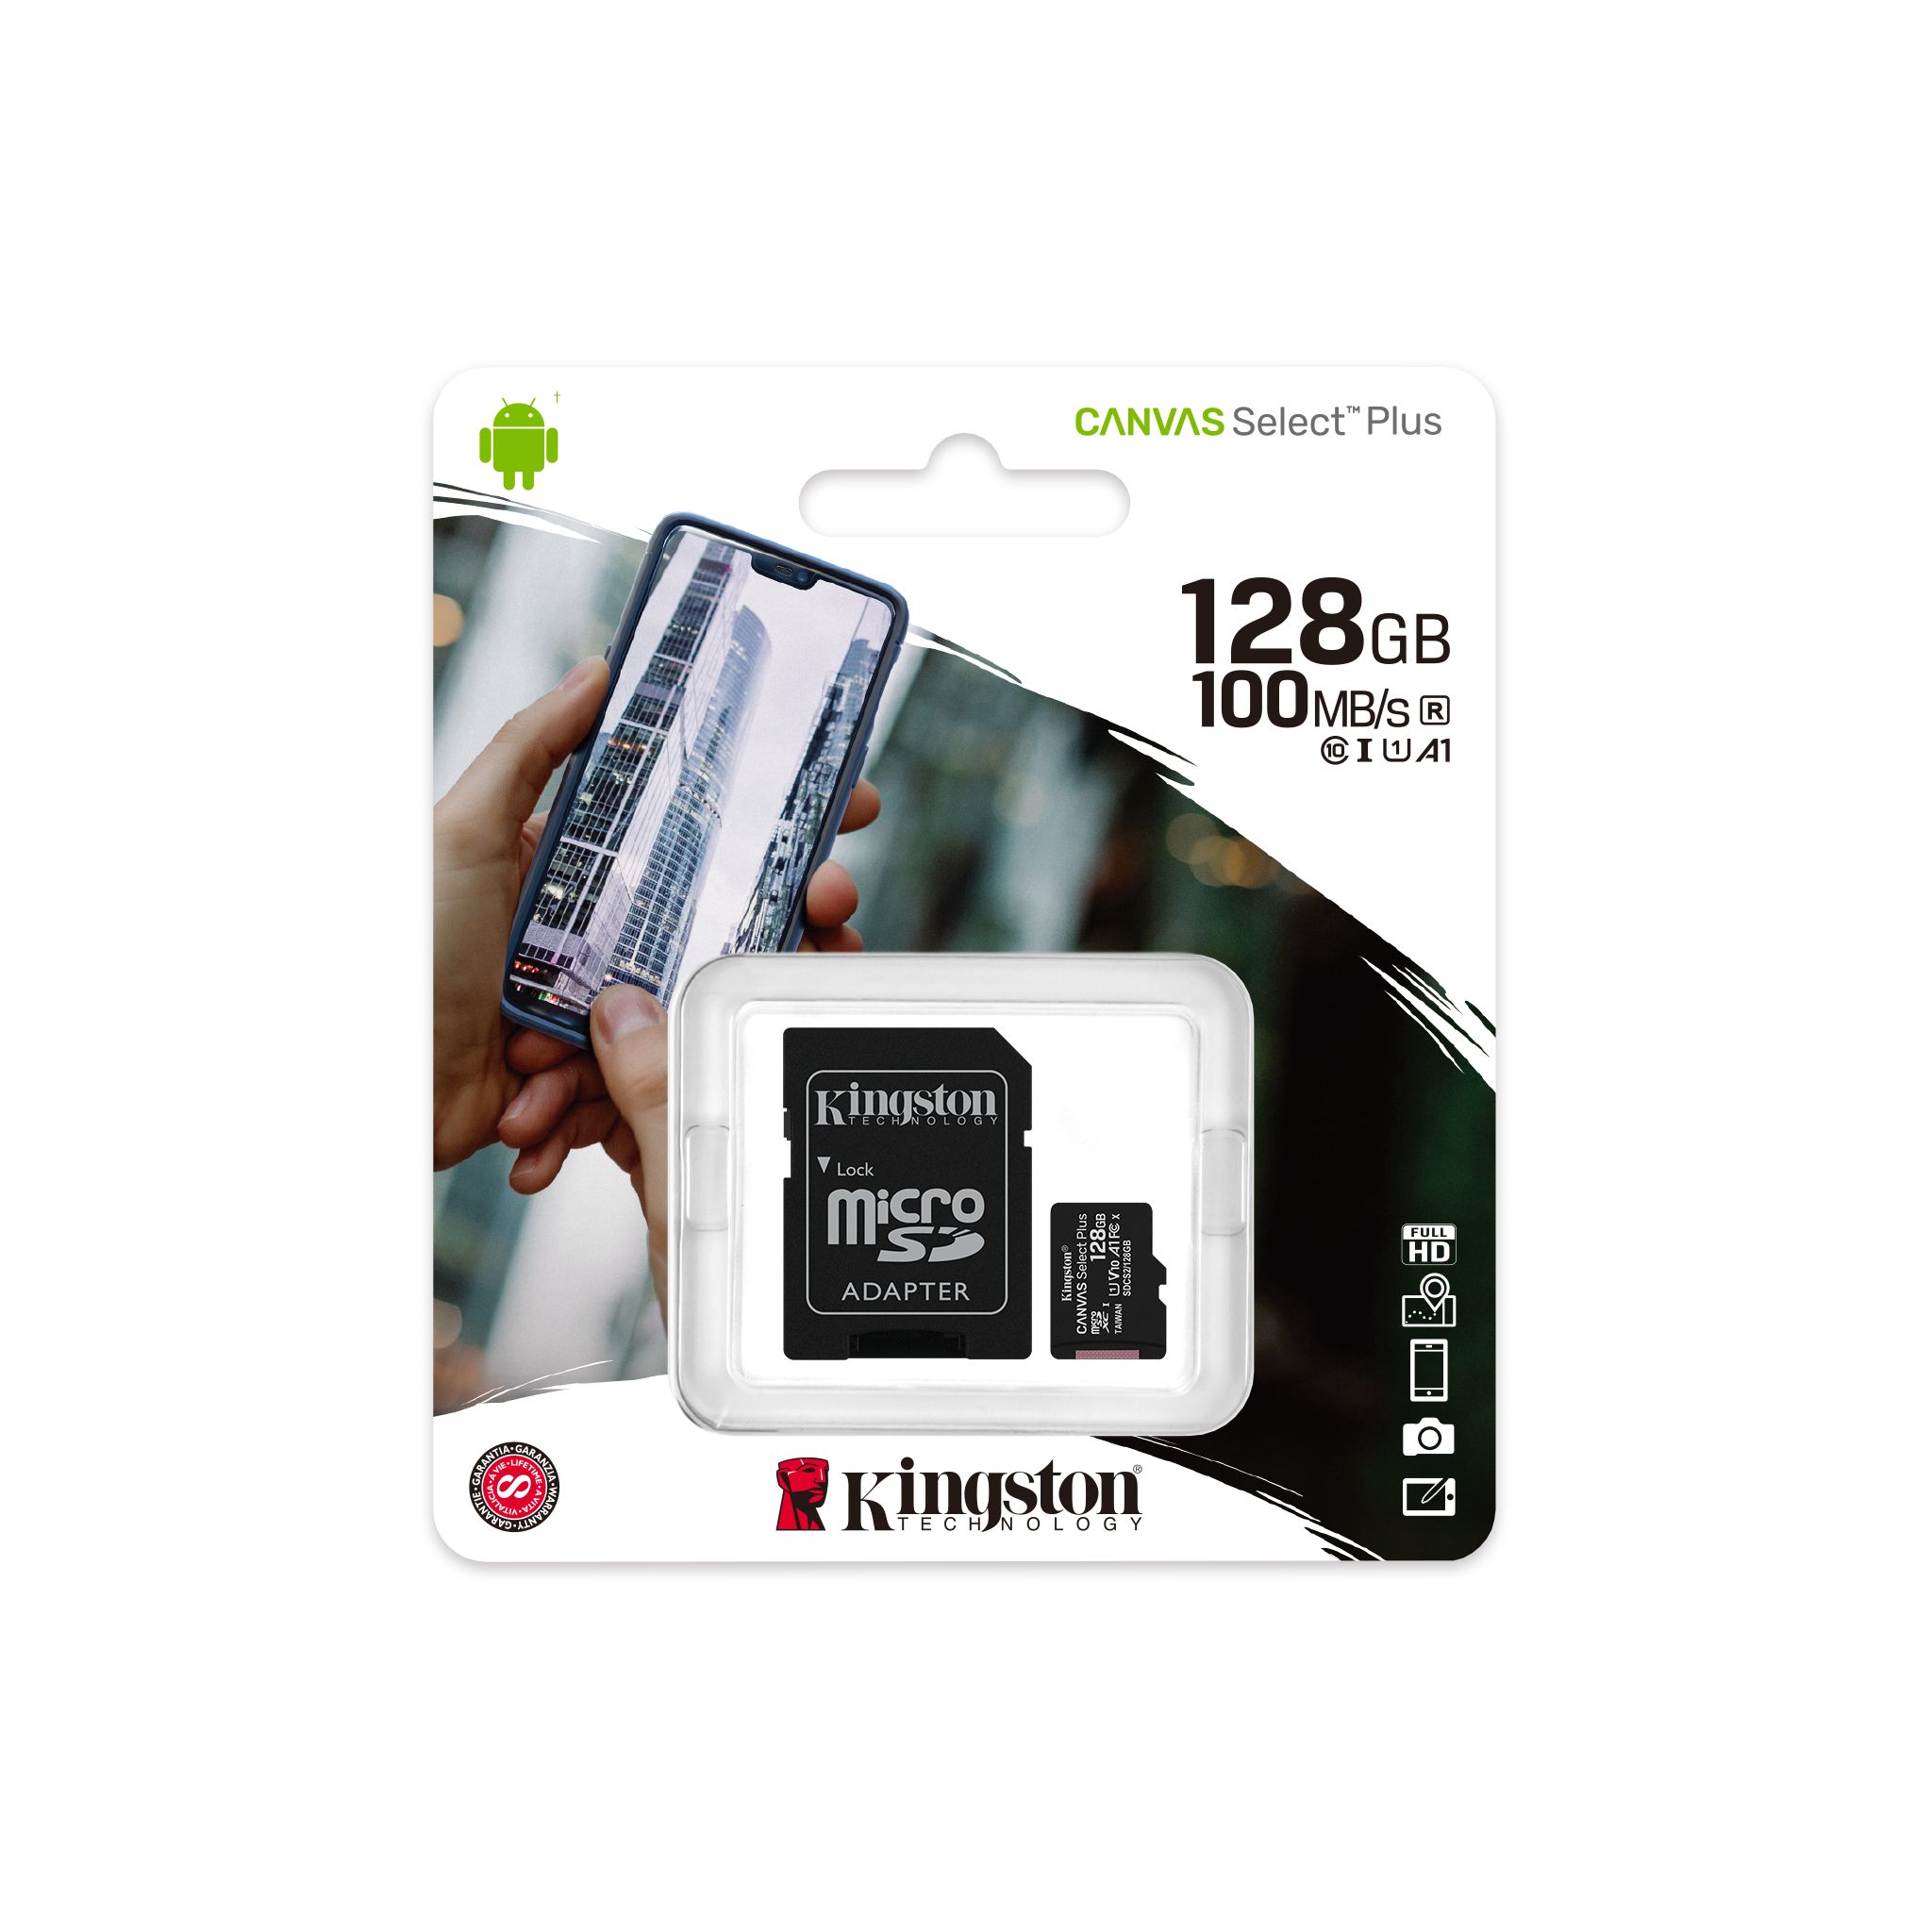 Kingston 512GB Huawei NXT-TL00 MicroSDXC Canvas Select Plus Card Verified by SanFlash. 100MBs Works with Kingston 